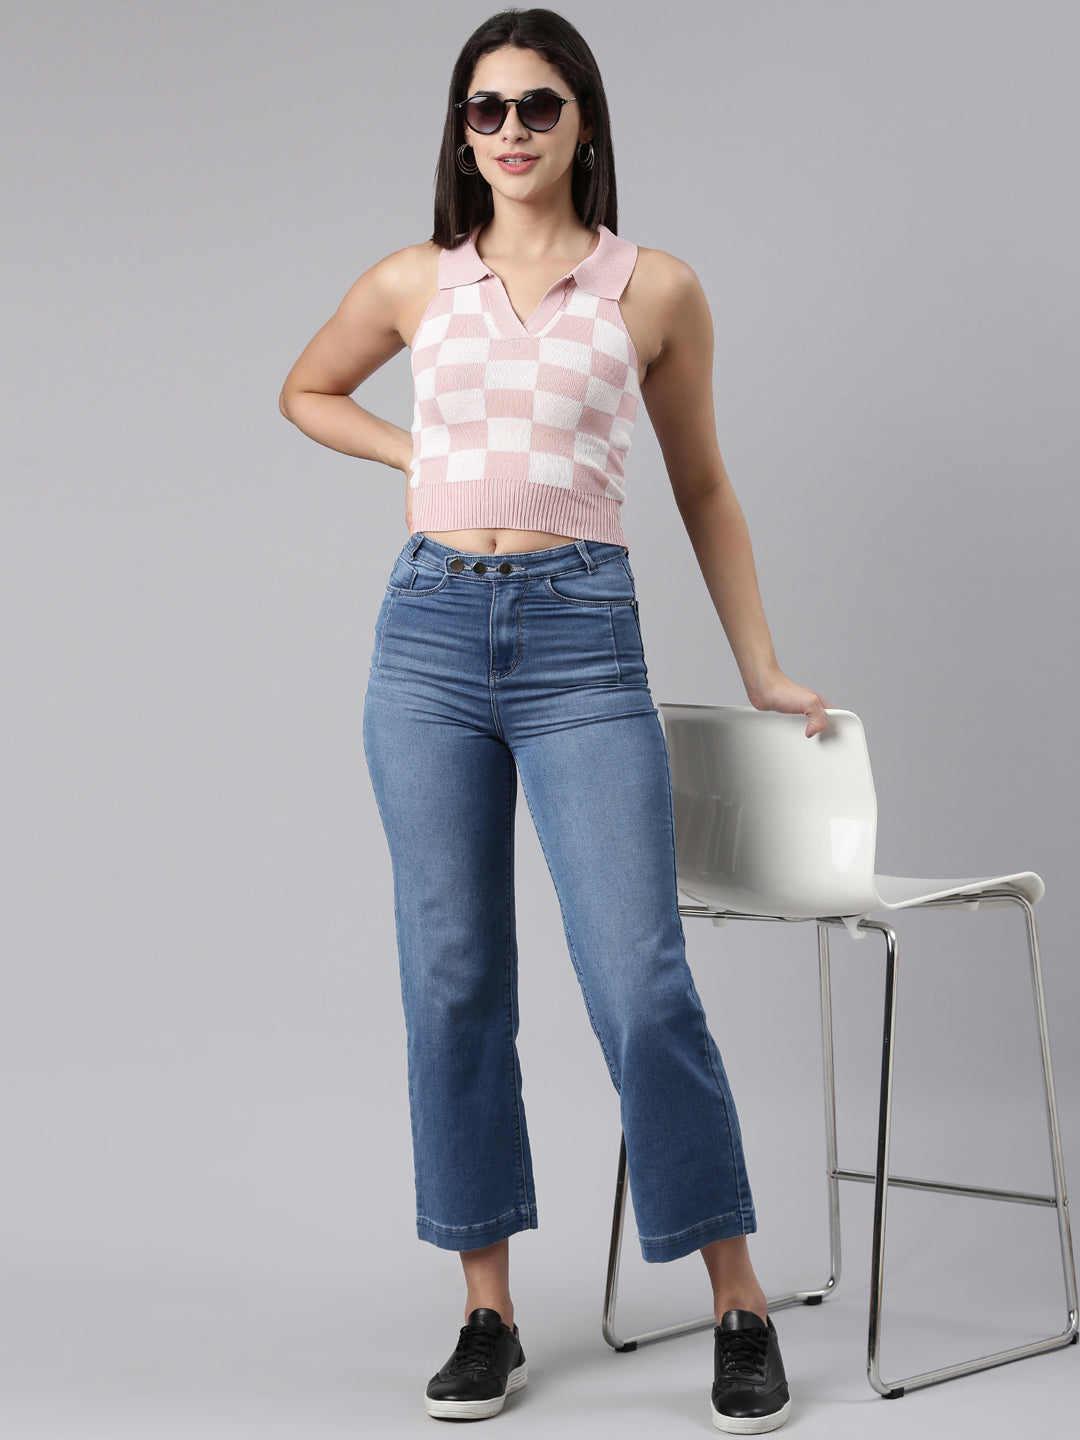 Above the Keyboard Collar Checked Pink Cinched Waist Crop Top